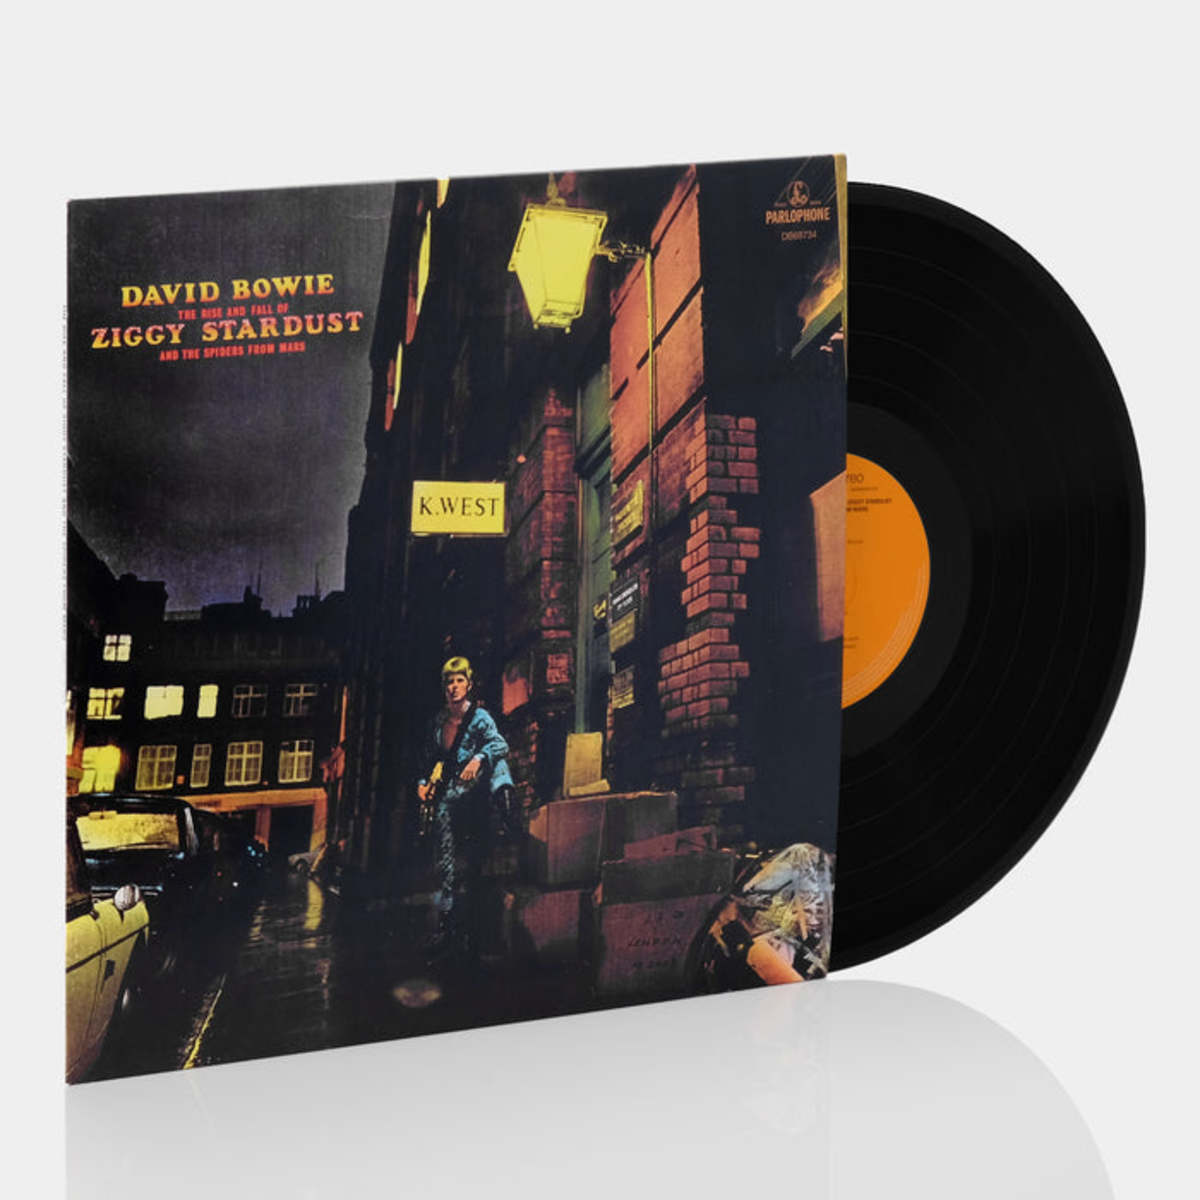 The half-speed mastered reissue of The Rise and Fall of Ziggy Stardust and The Spiders From Mars